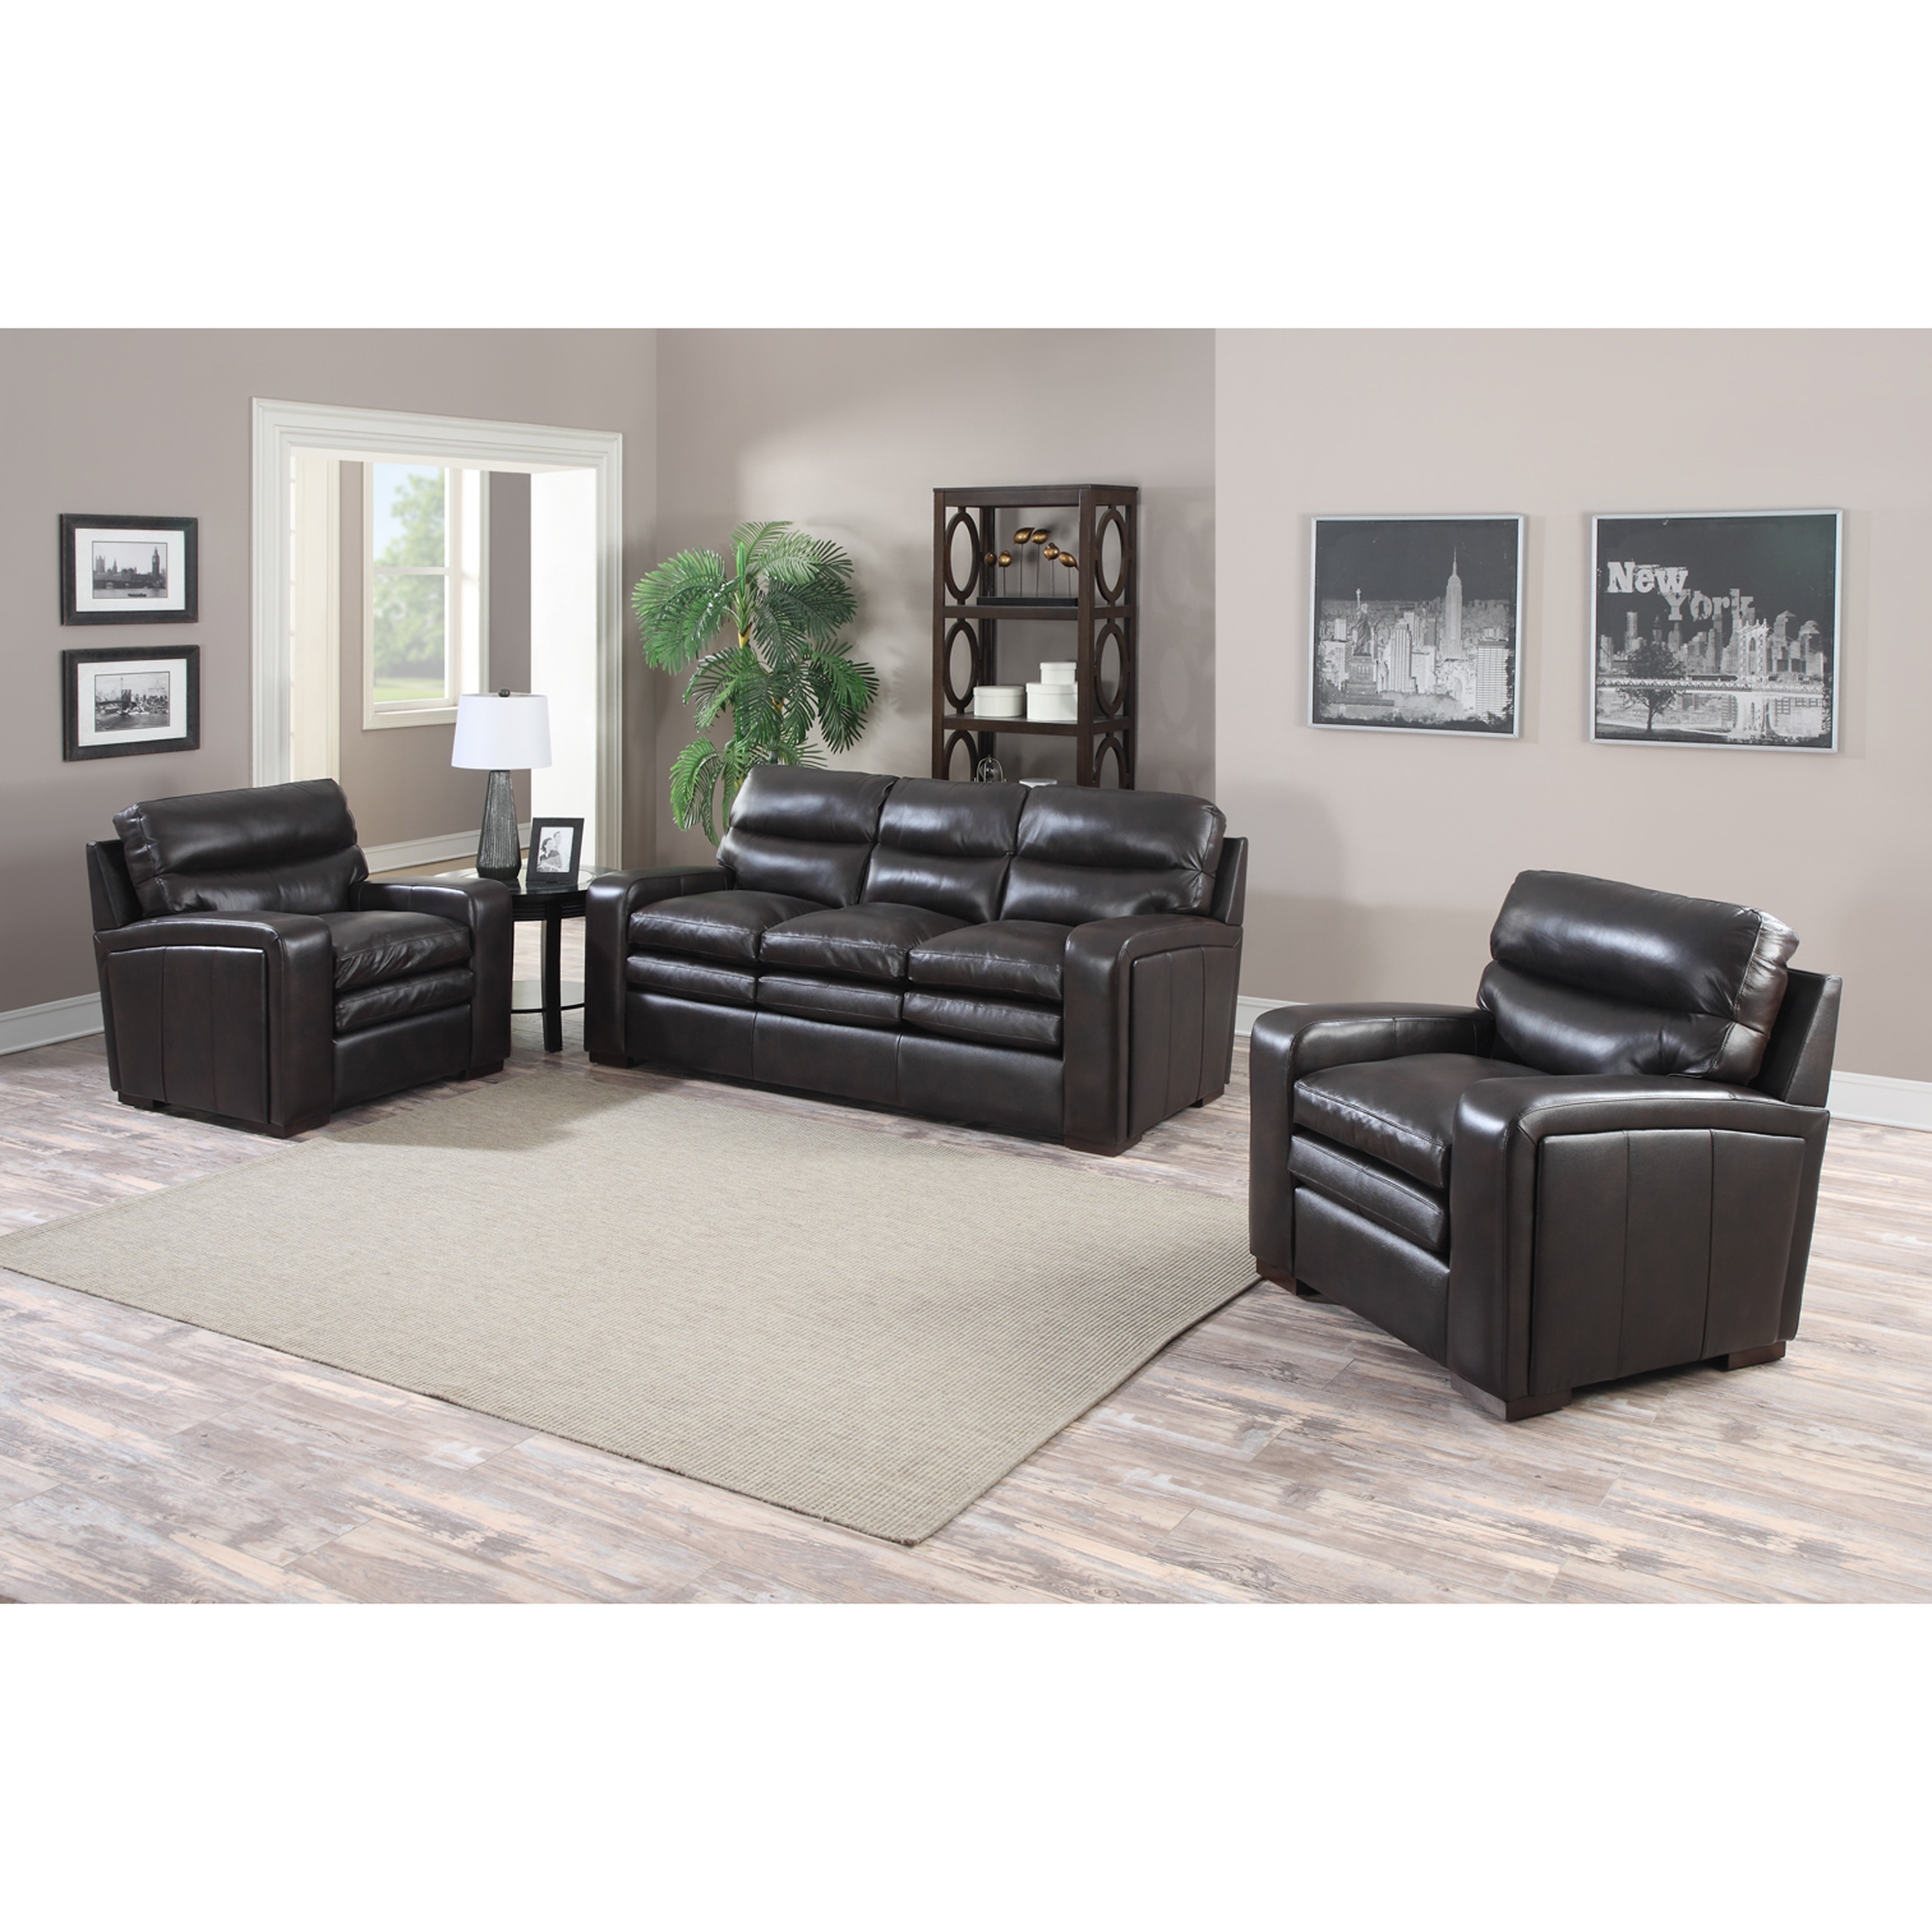 Mercer Dark Brown Italian Leather Sofa And Two Leather Chairs